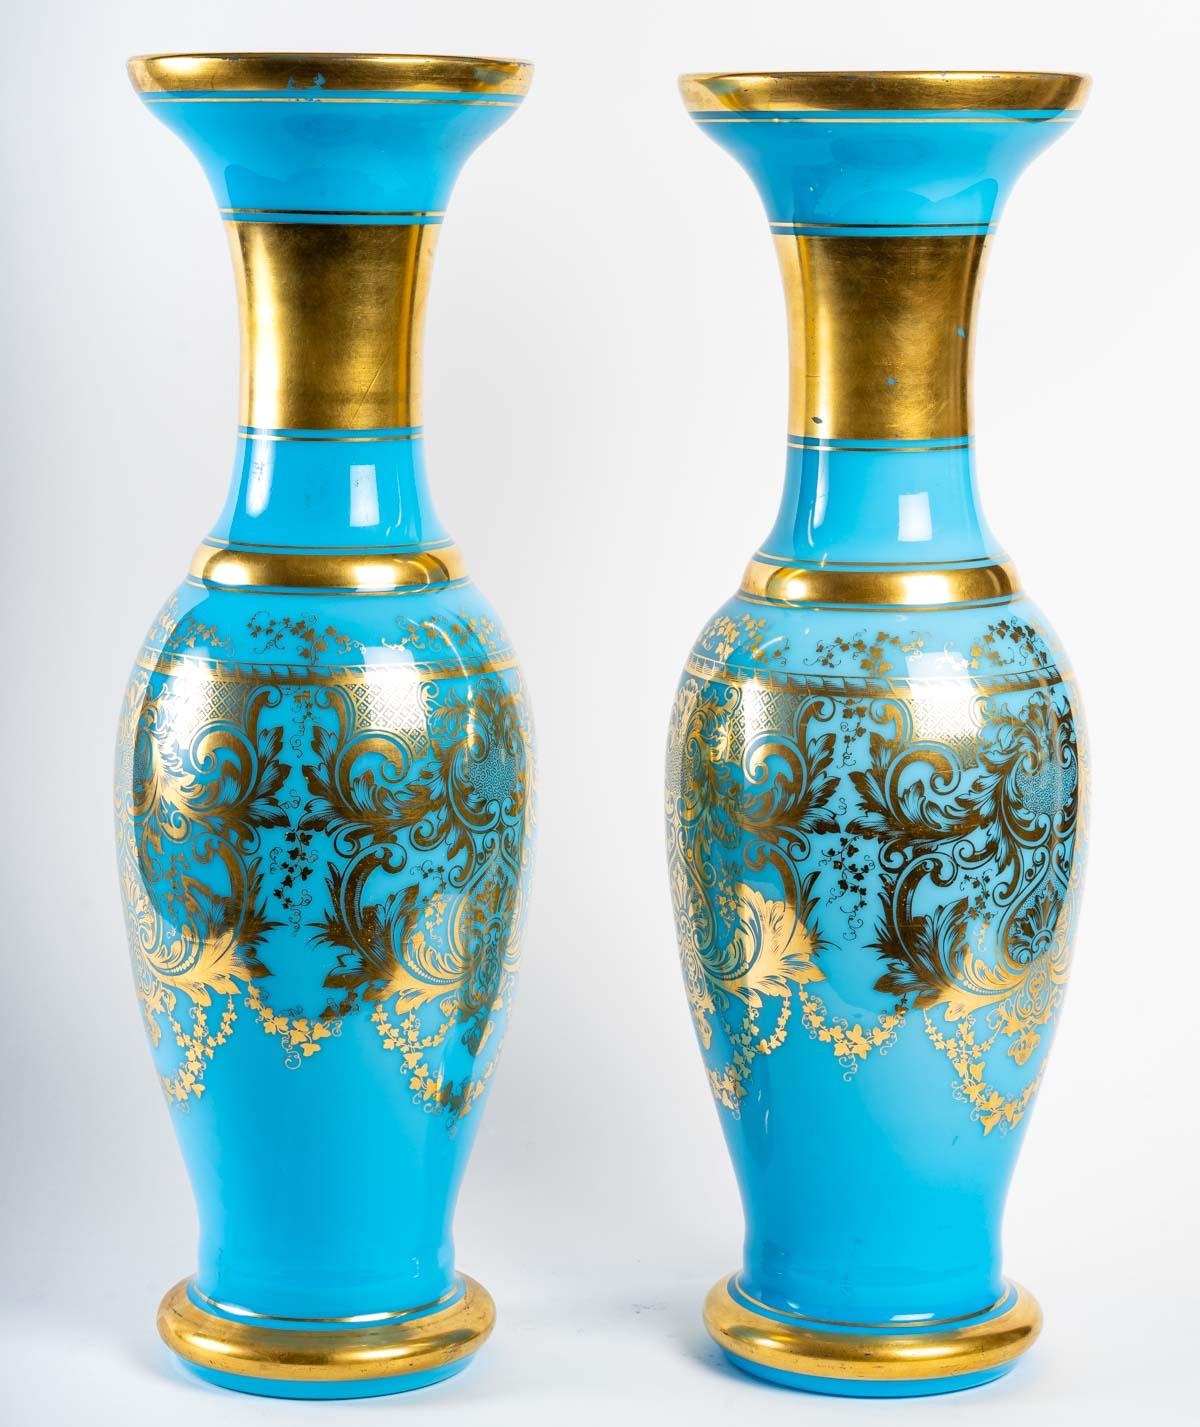 French Pair of Baccarat Vases, 19 Century